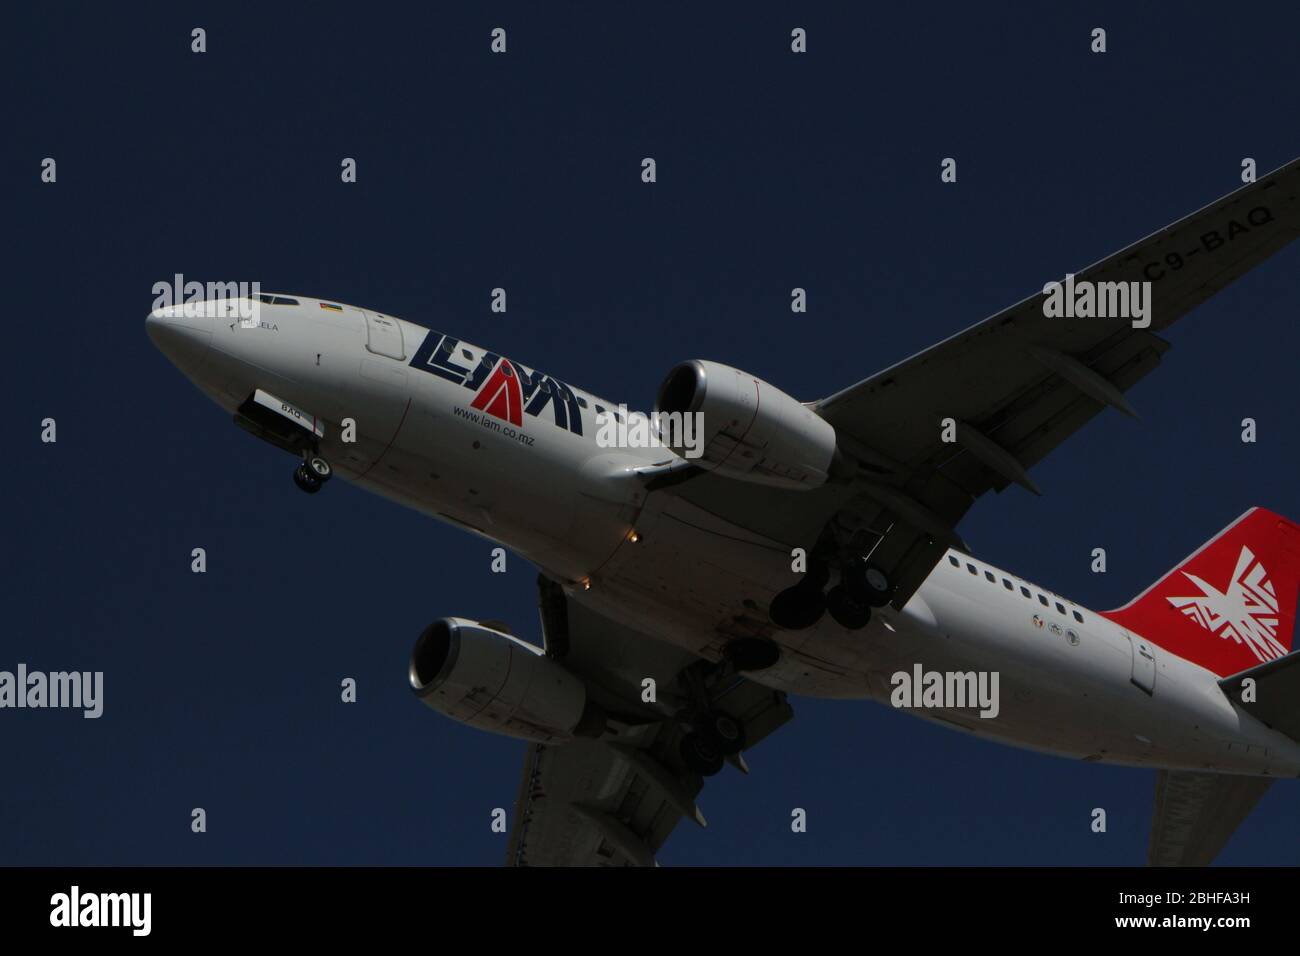 LAM Mozambique Airlines 'C9-BAQ' Stock Photo